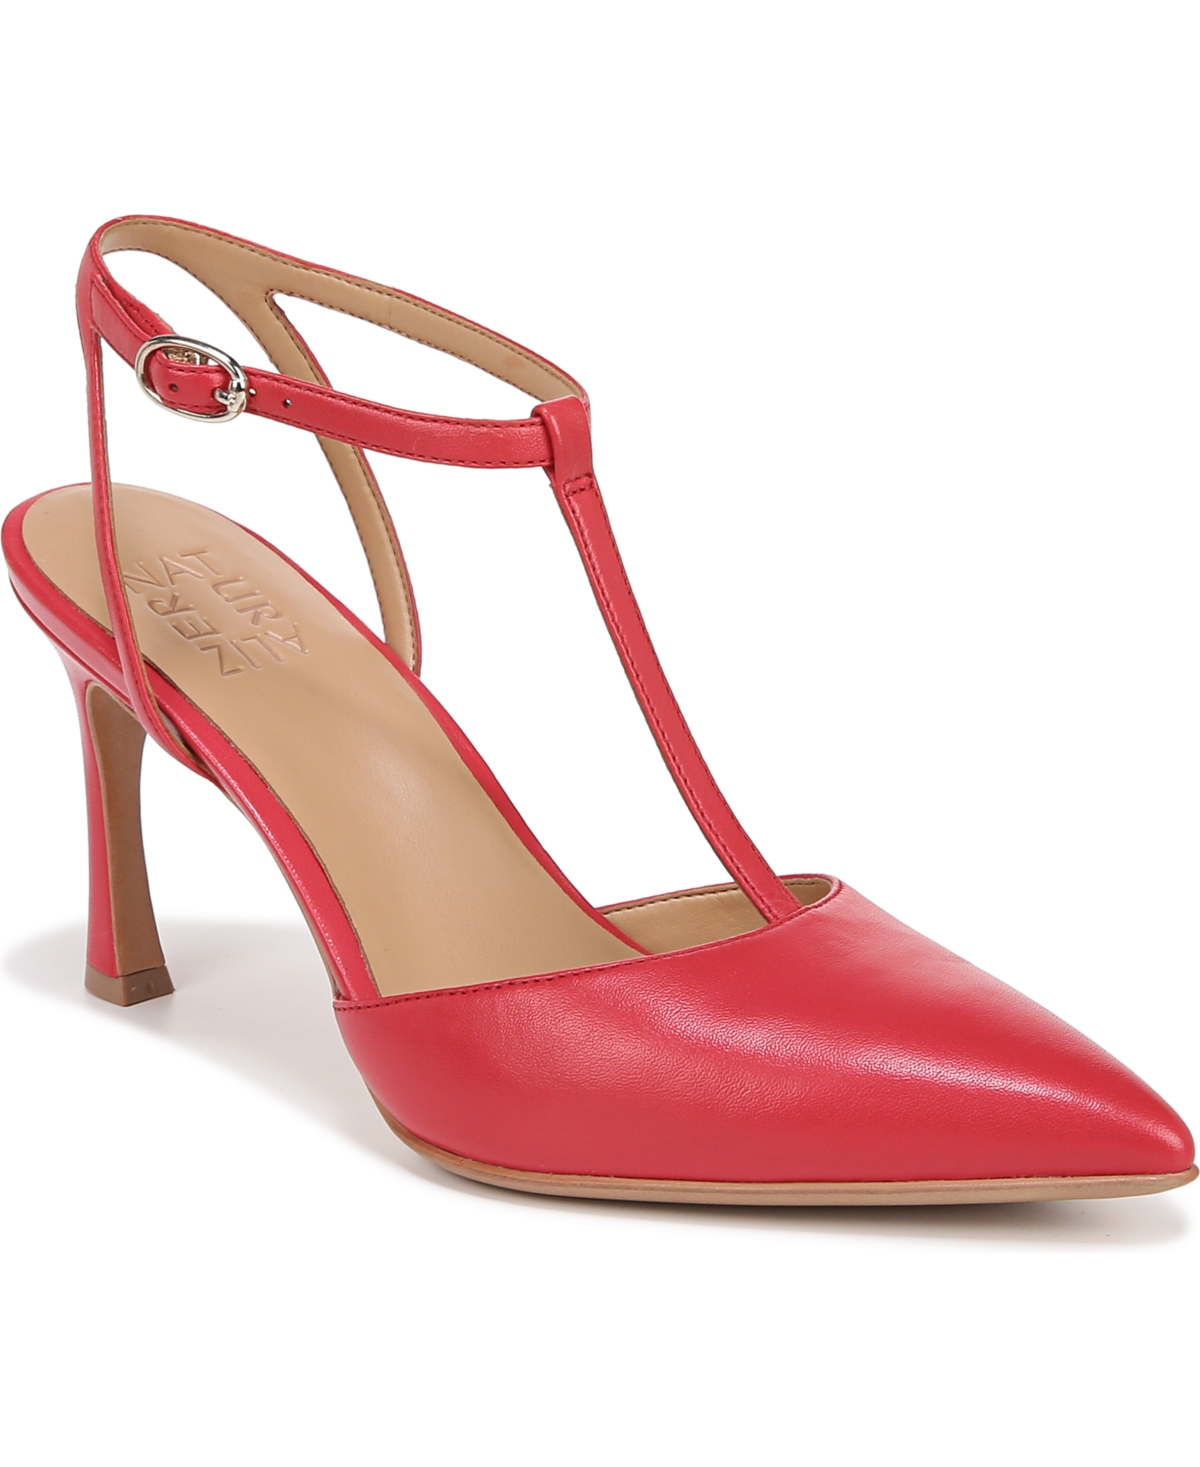 Naturalizer Astrid T-strap Pumps In Crantini Red Leather